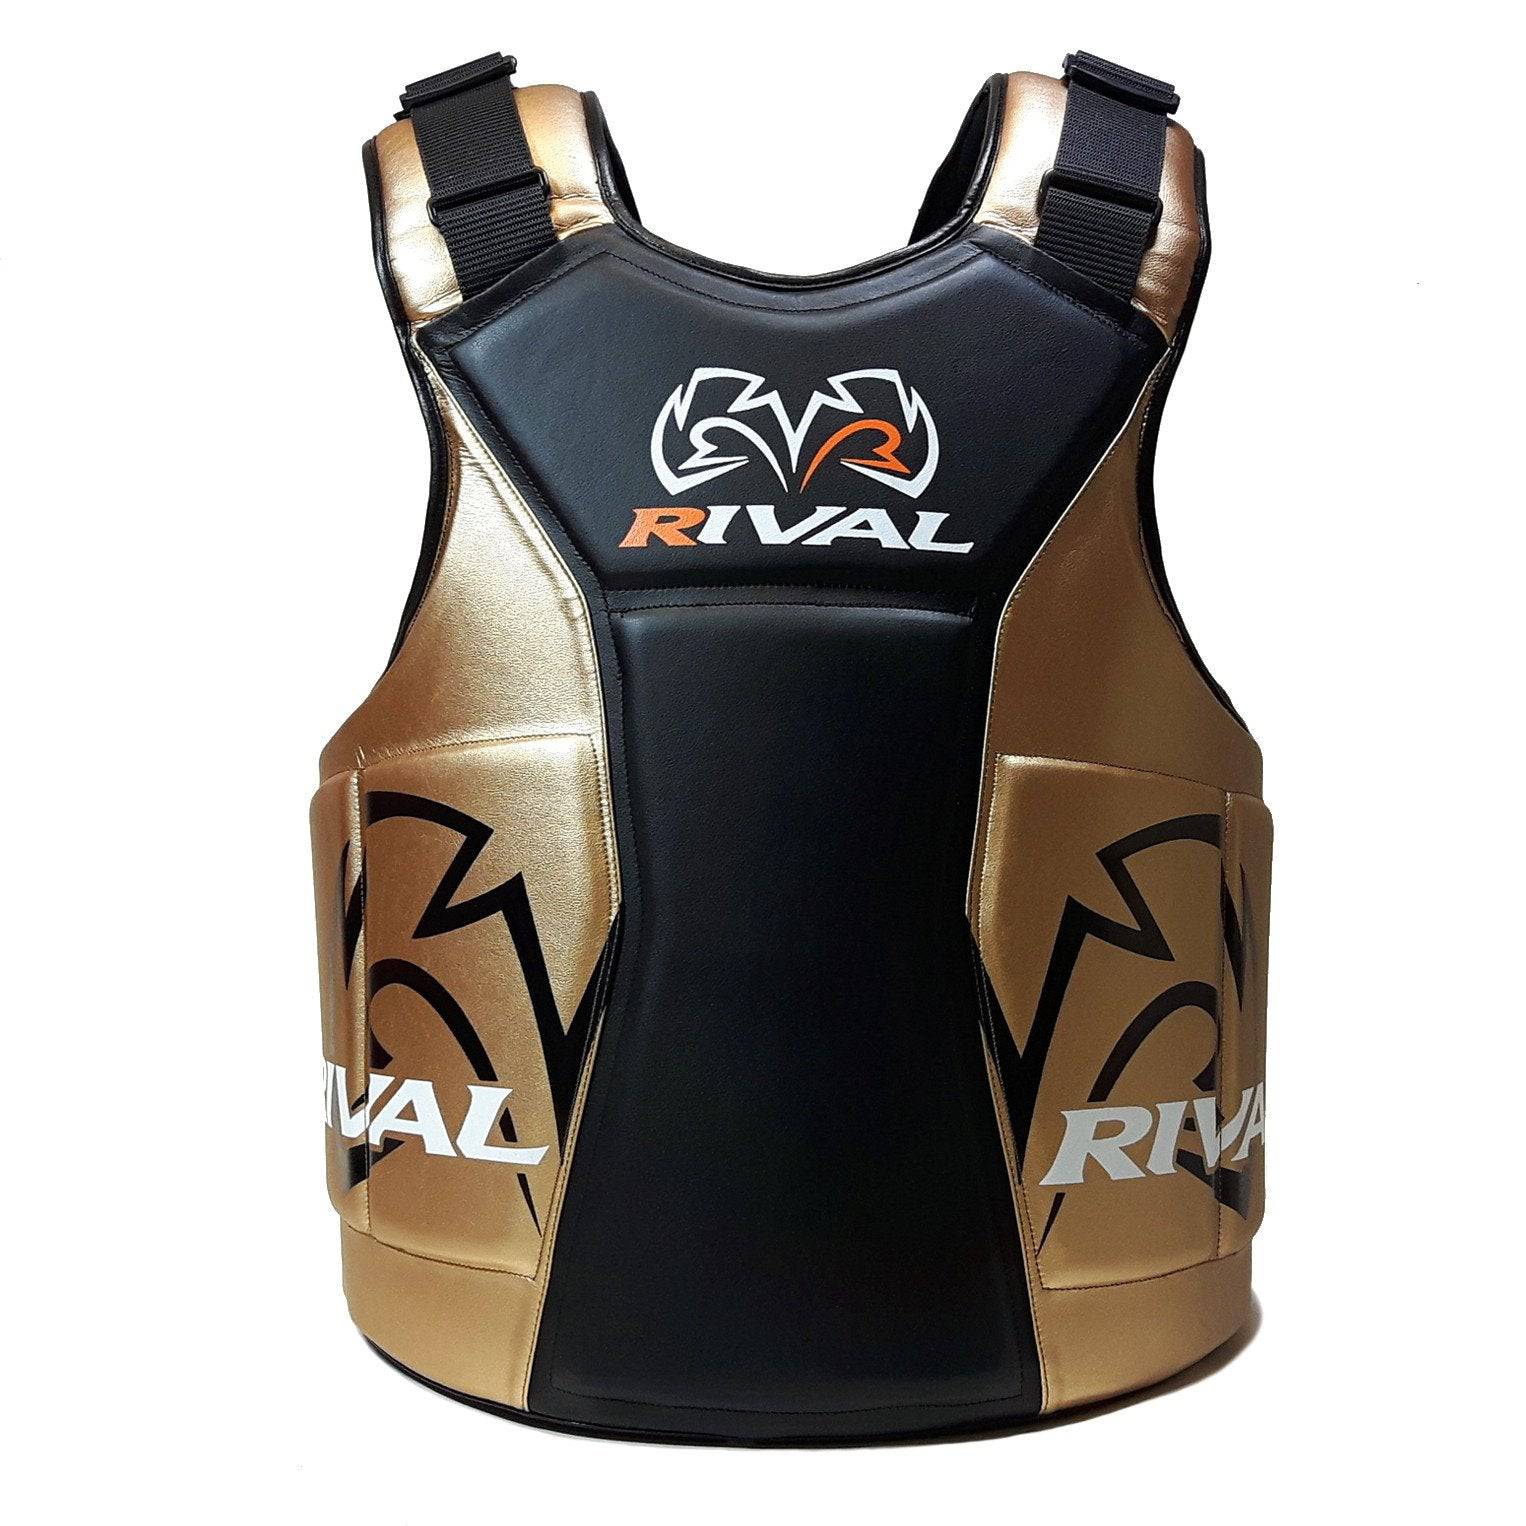 Rival | Body Protector - The Shield - XTC Fitness - Exercise Equipment Superstore - Canada - Body Protector